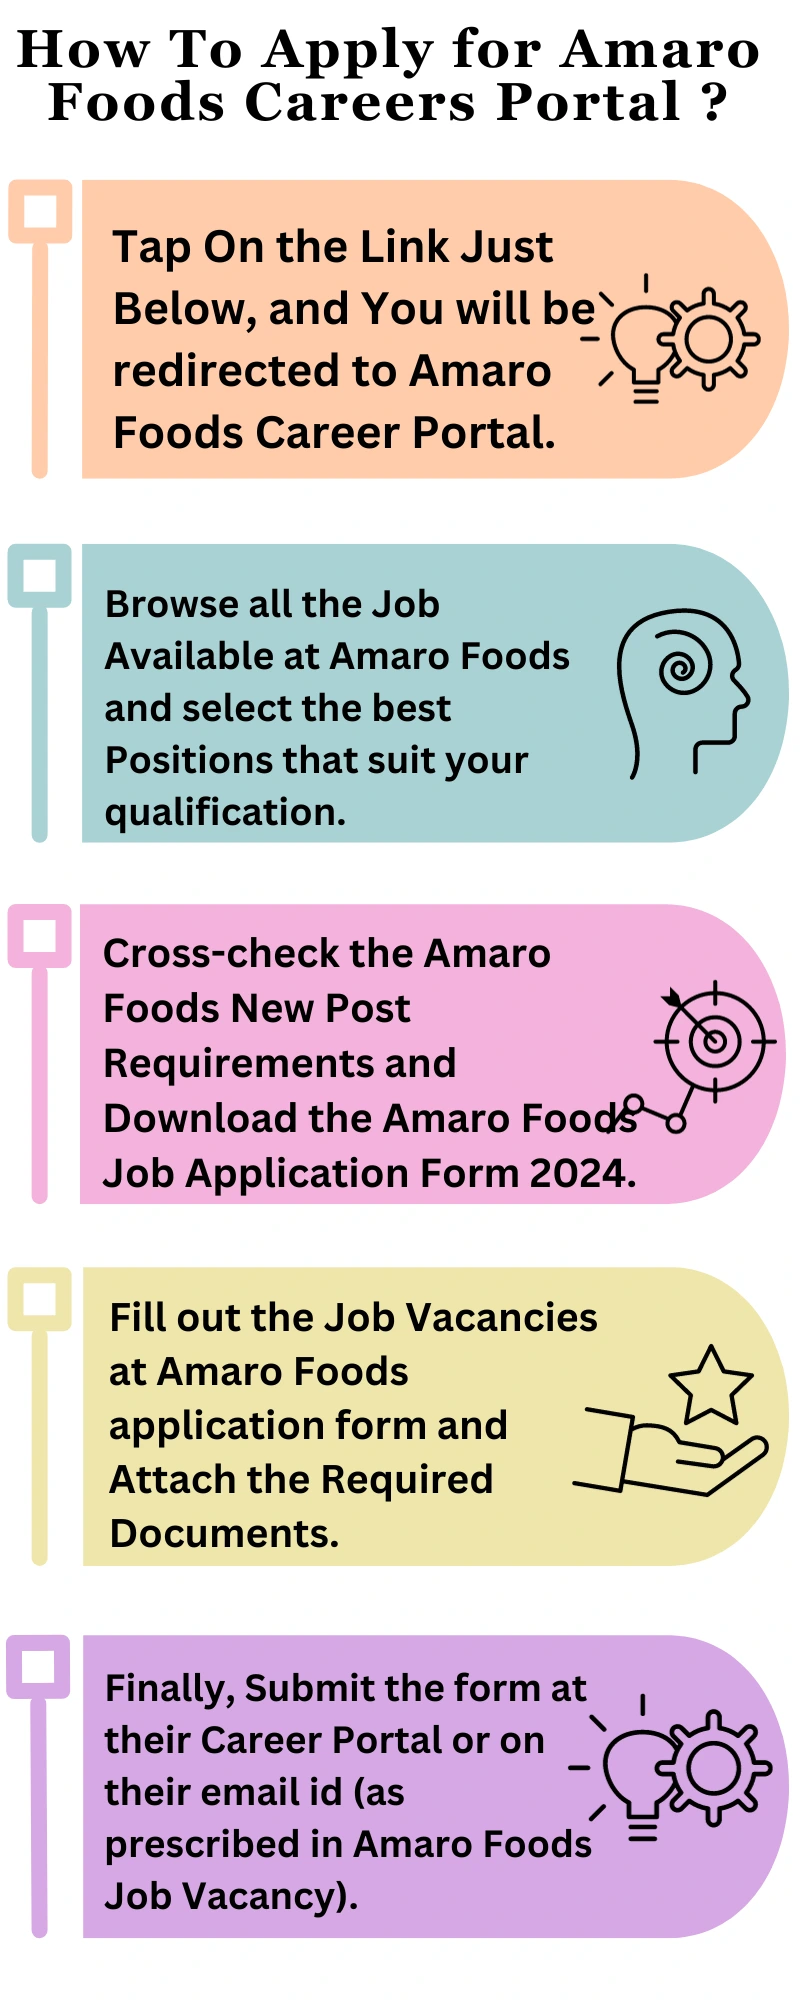 How To Apply for Amaro Foods Careers Portal ?